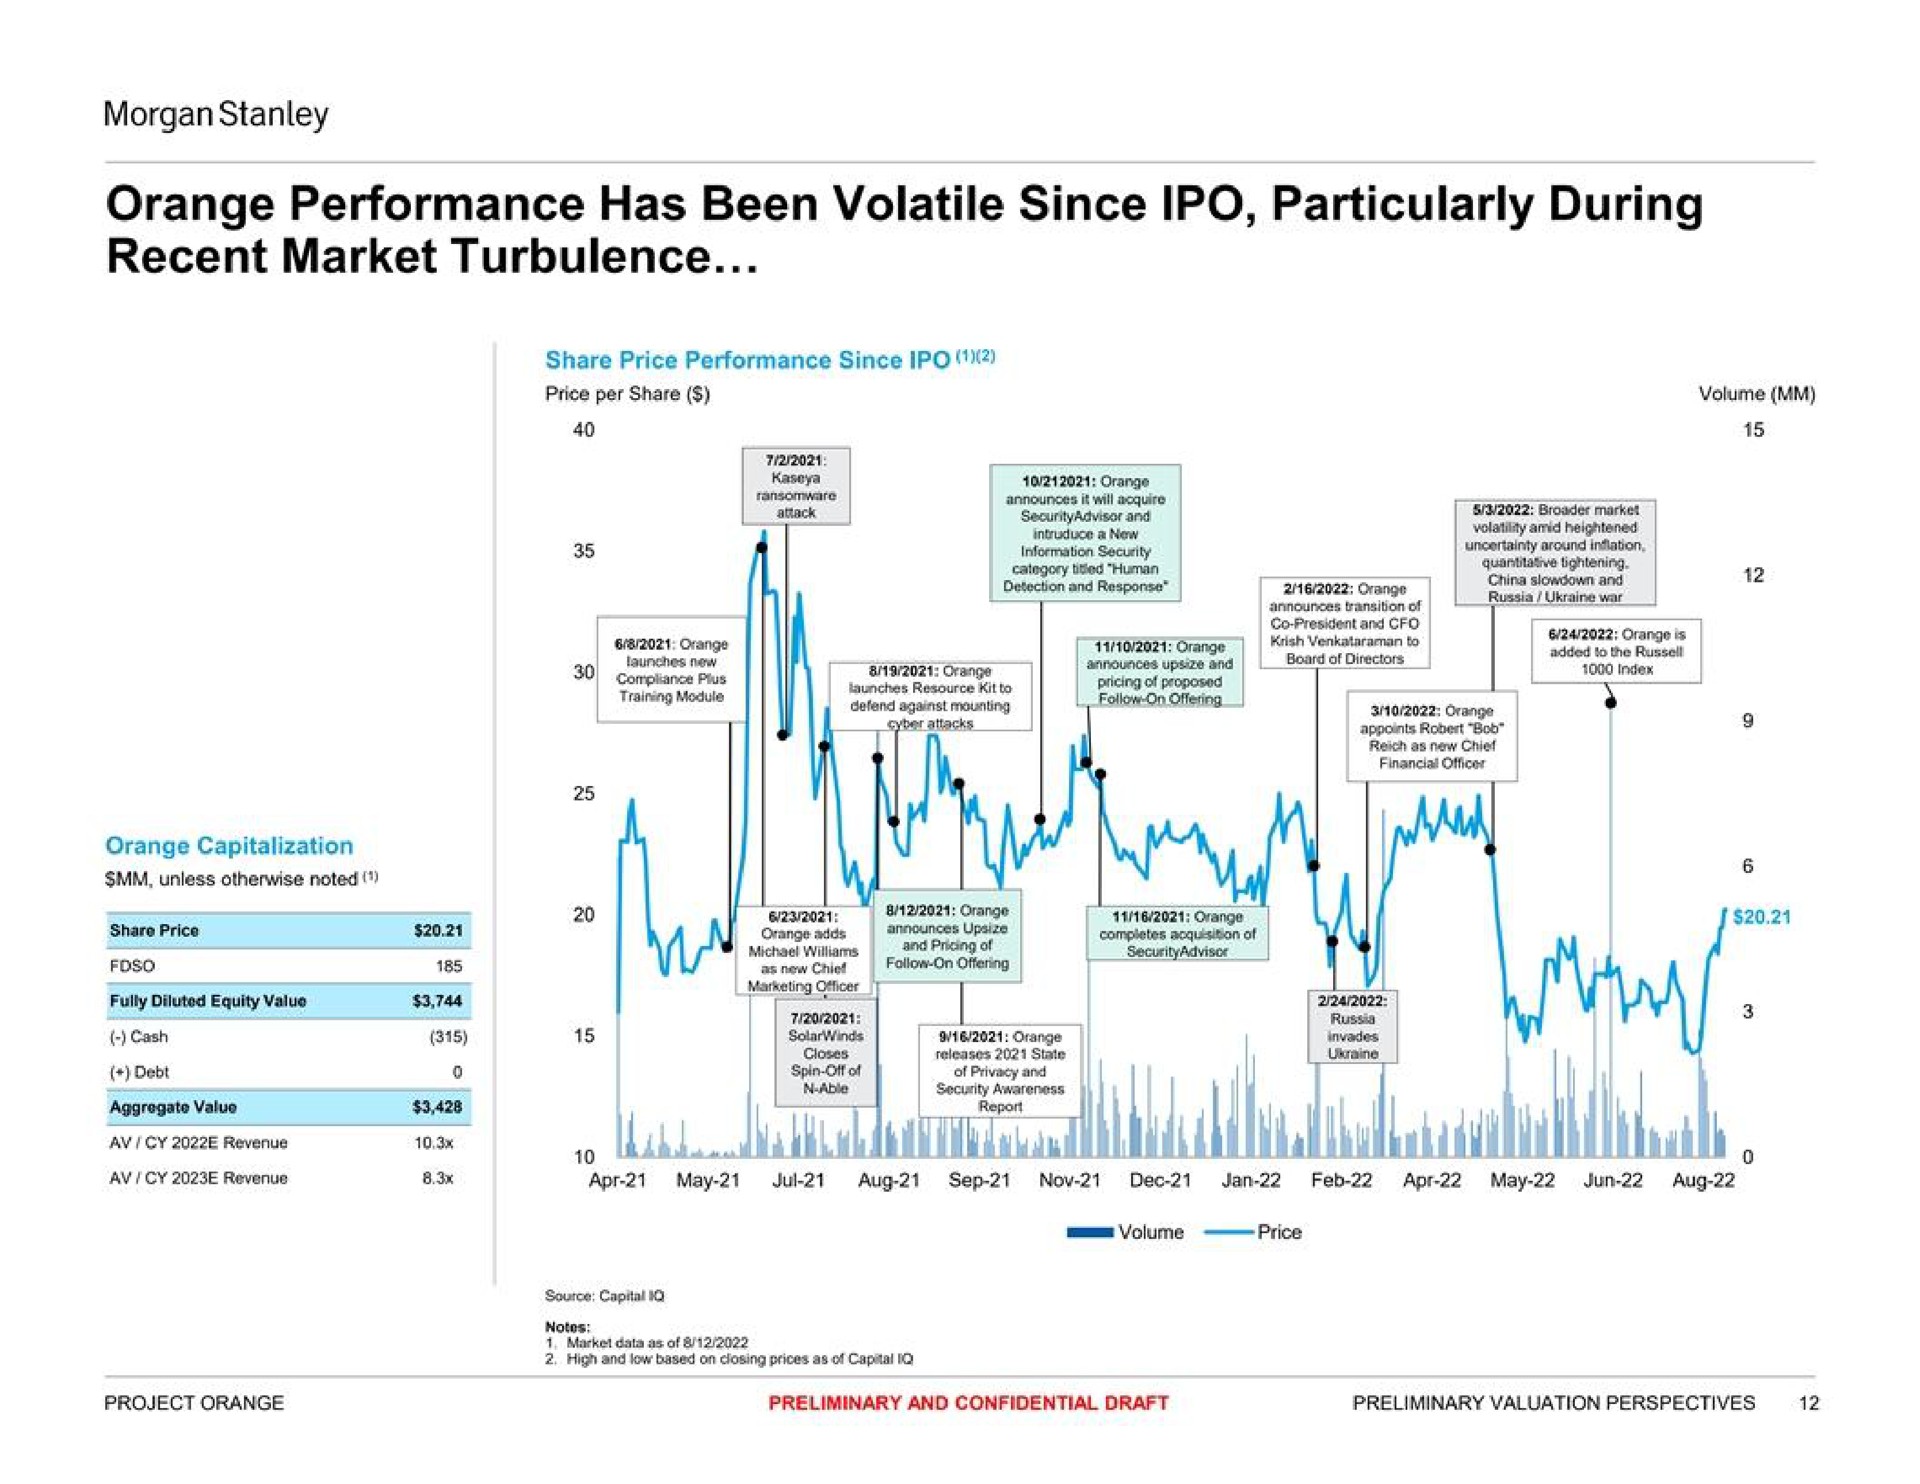 orange performance has been volatile since recent market turbulence particularly during | Morgan Stanley